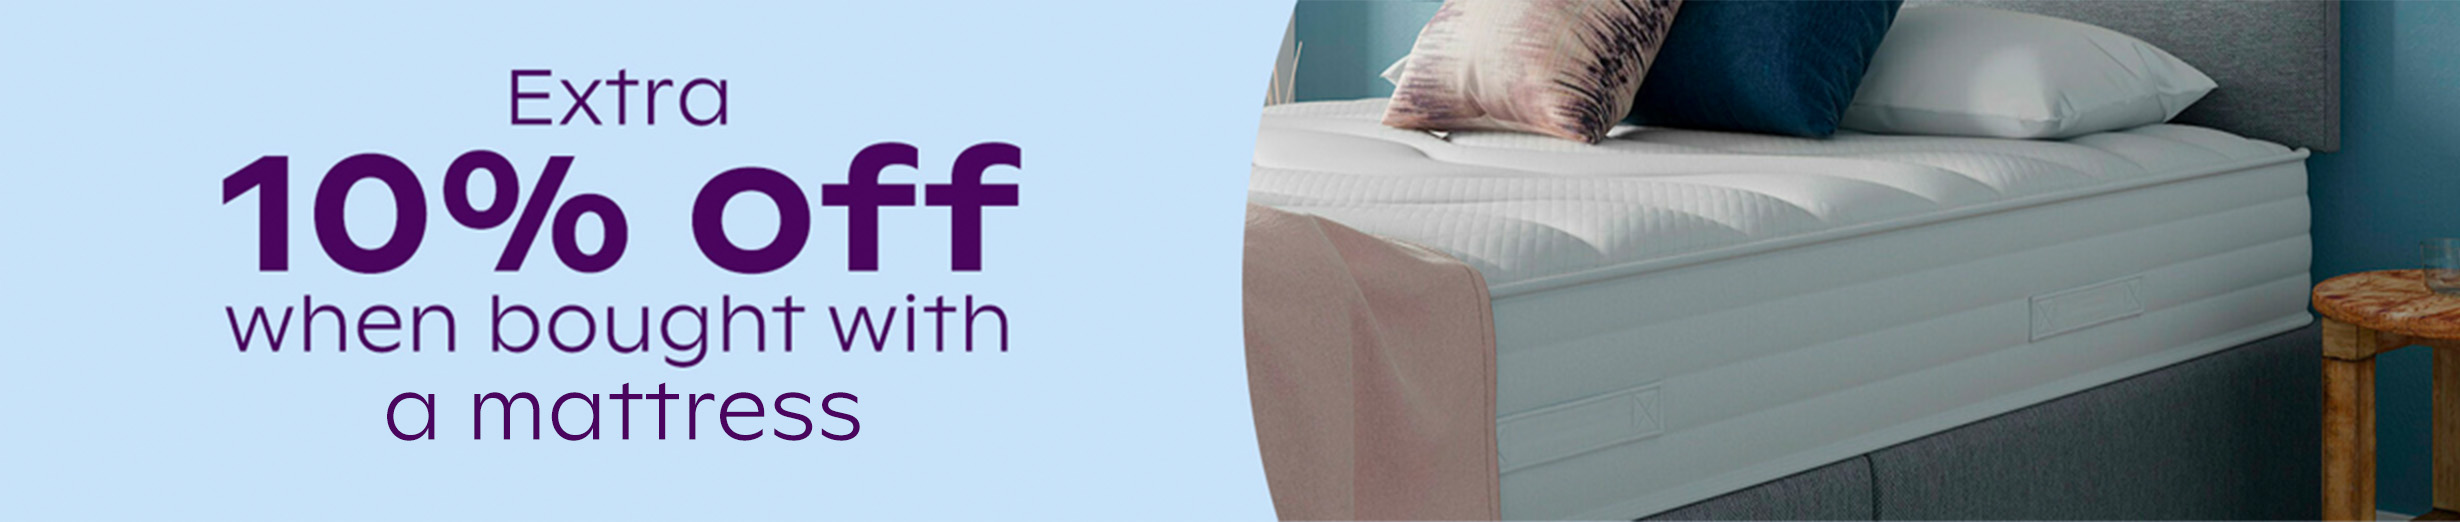 Extra 10% off bed frames and divan bases when bought with a mattress